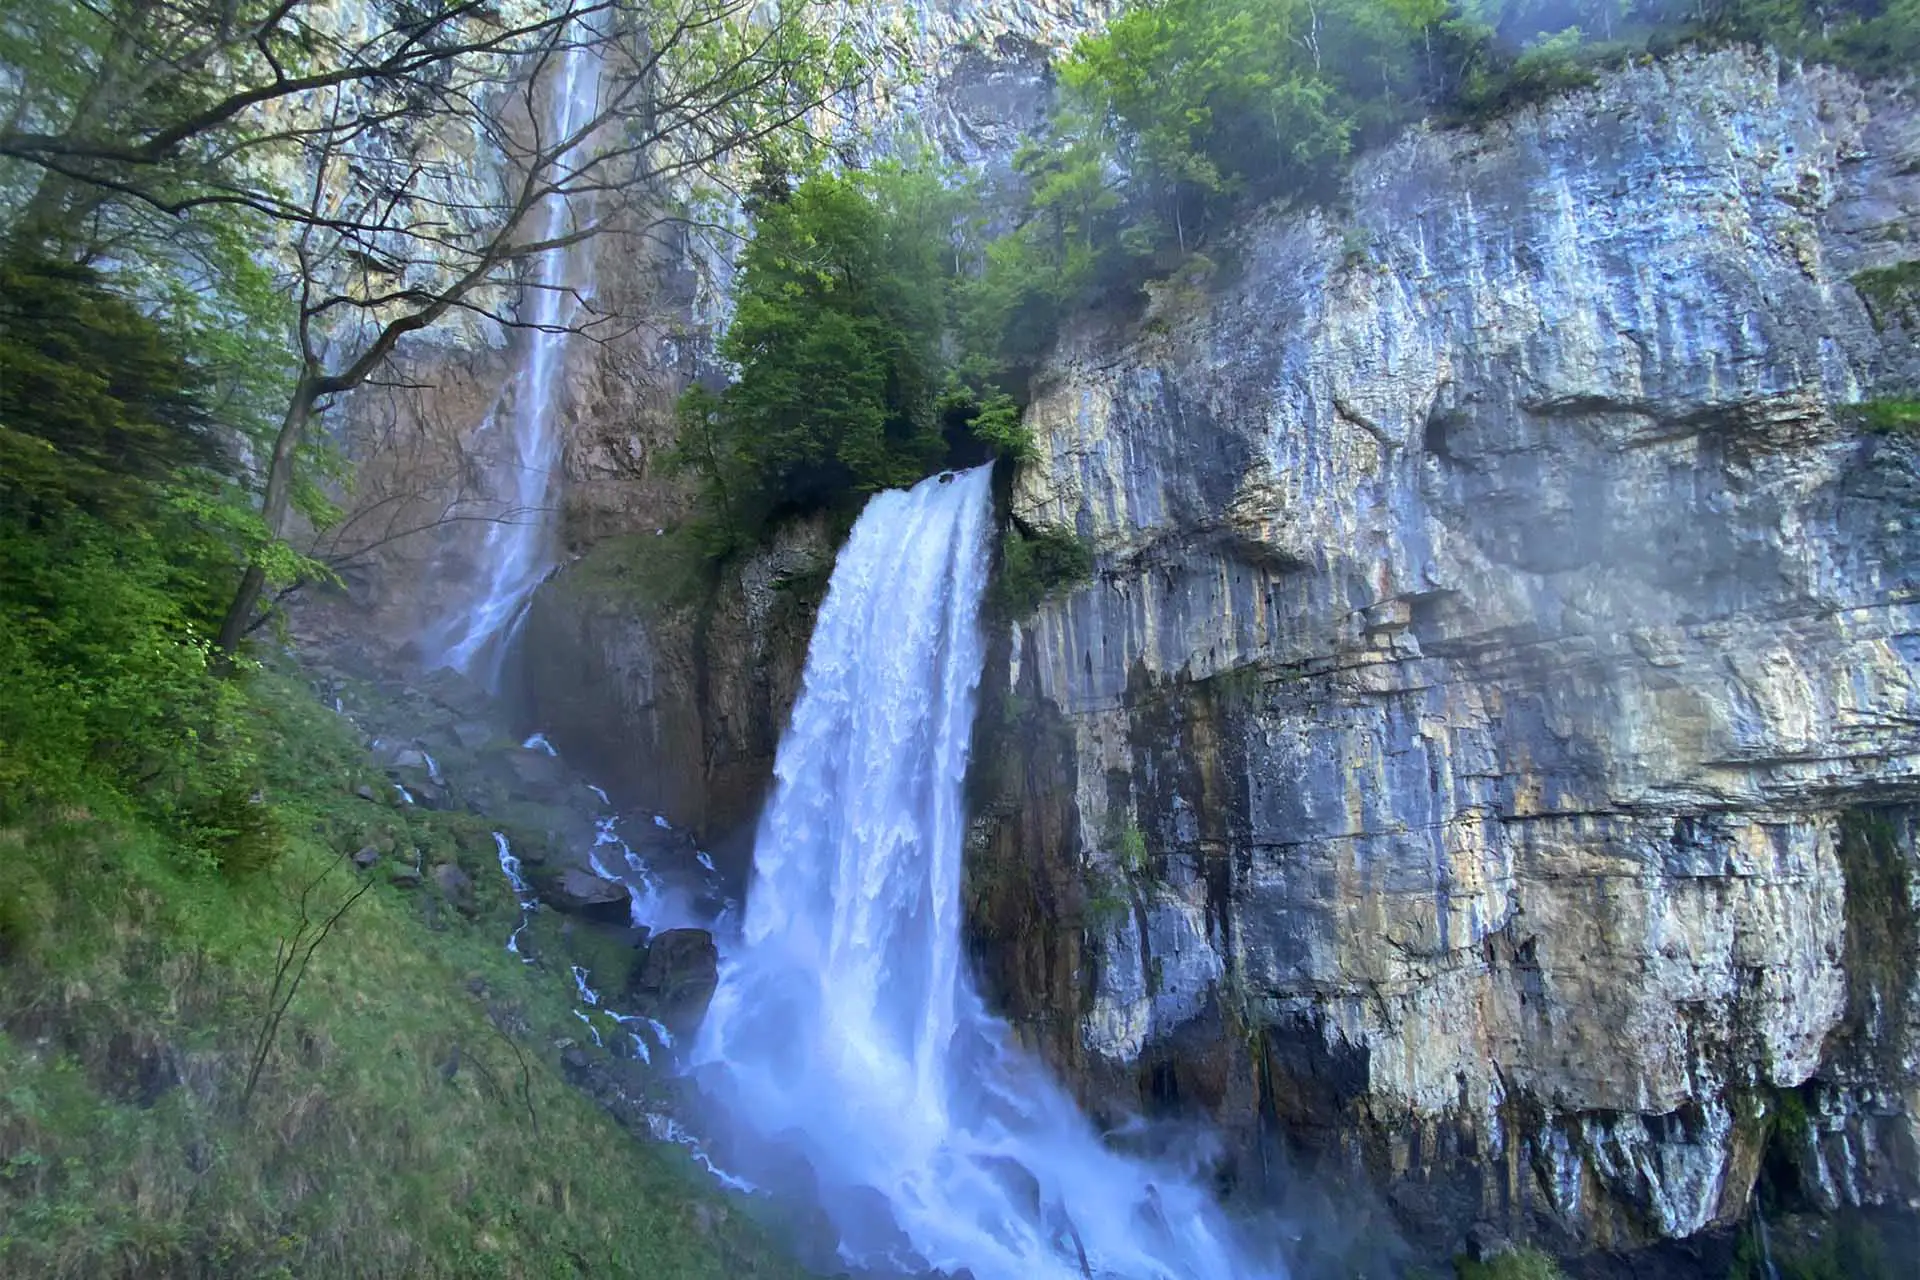 Rinquelle is an especially impressive waterfall after snow melt in spring.